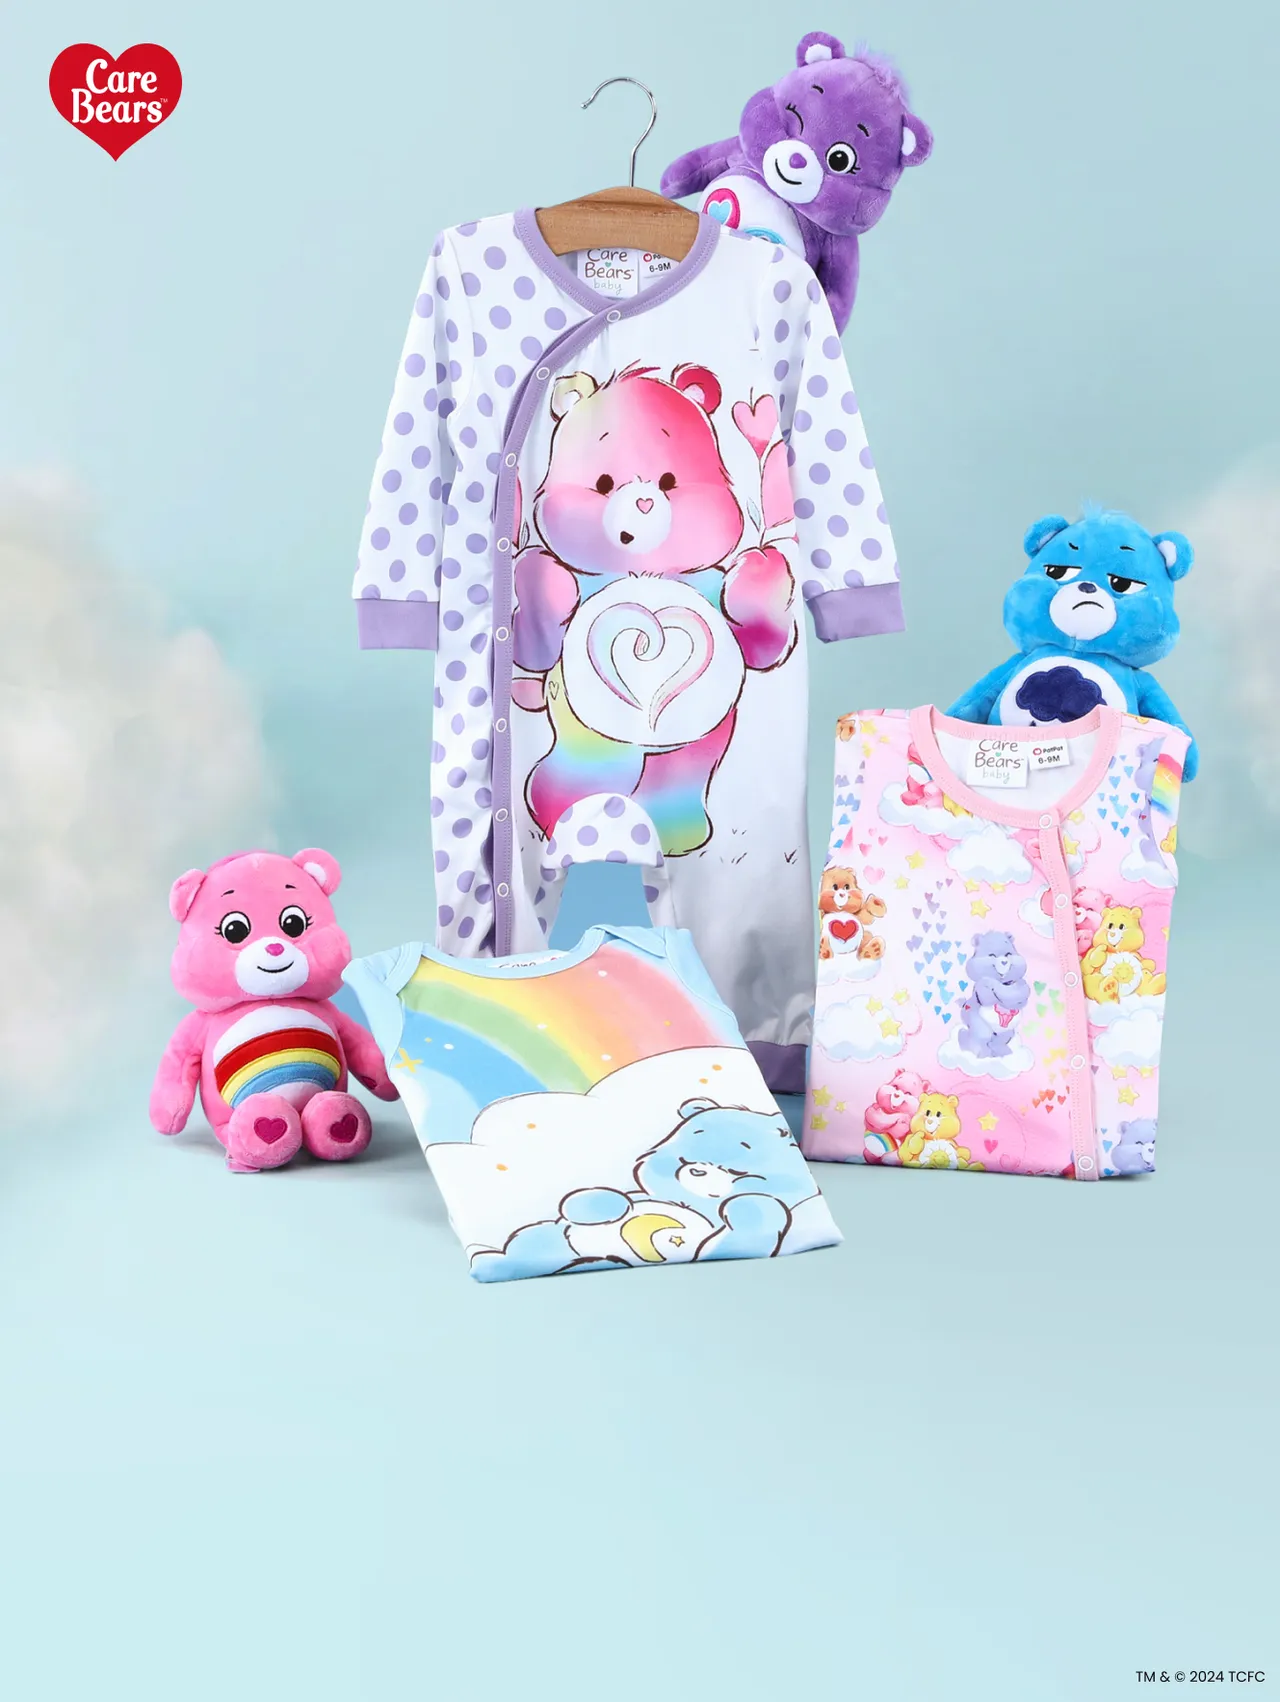 Click it to join Cuddle Up with Care Bears Baby Collection activity